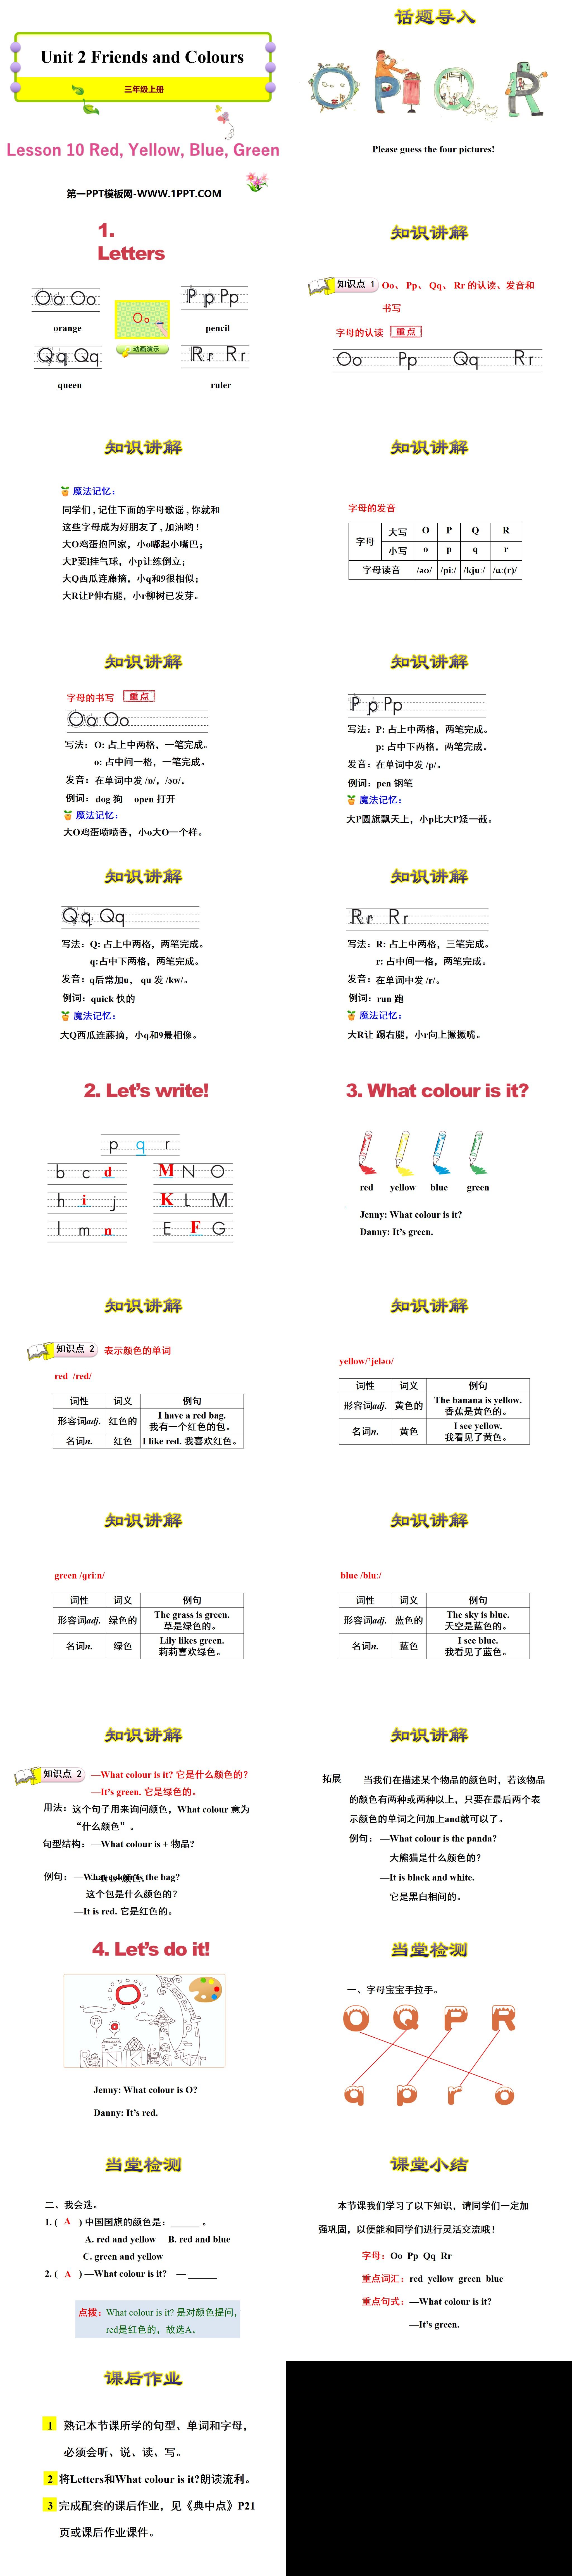 《Red,Yellow,Blue,Green》Friends and Colours PPT课件
（2）